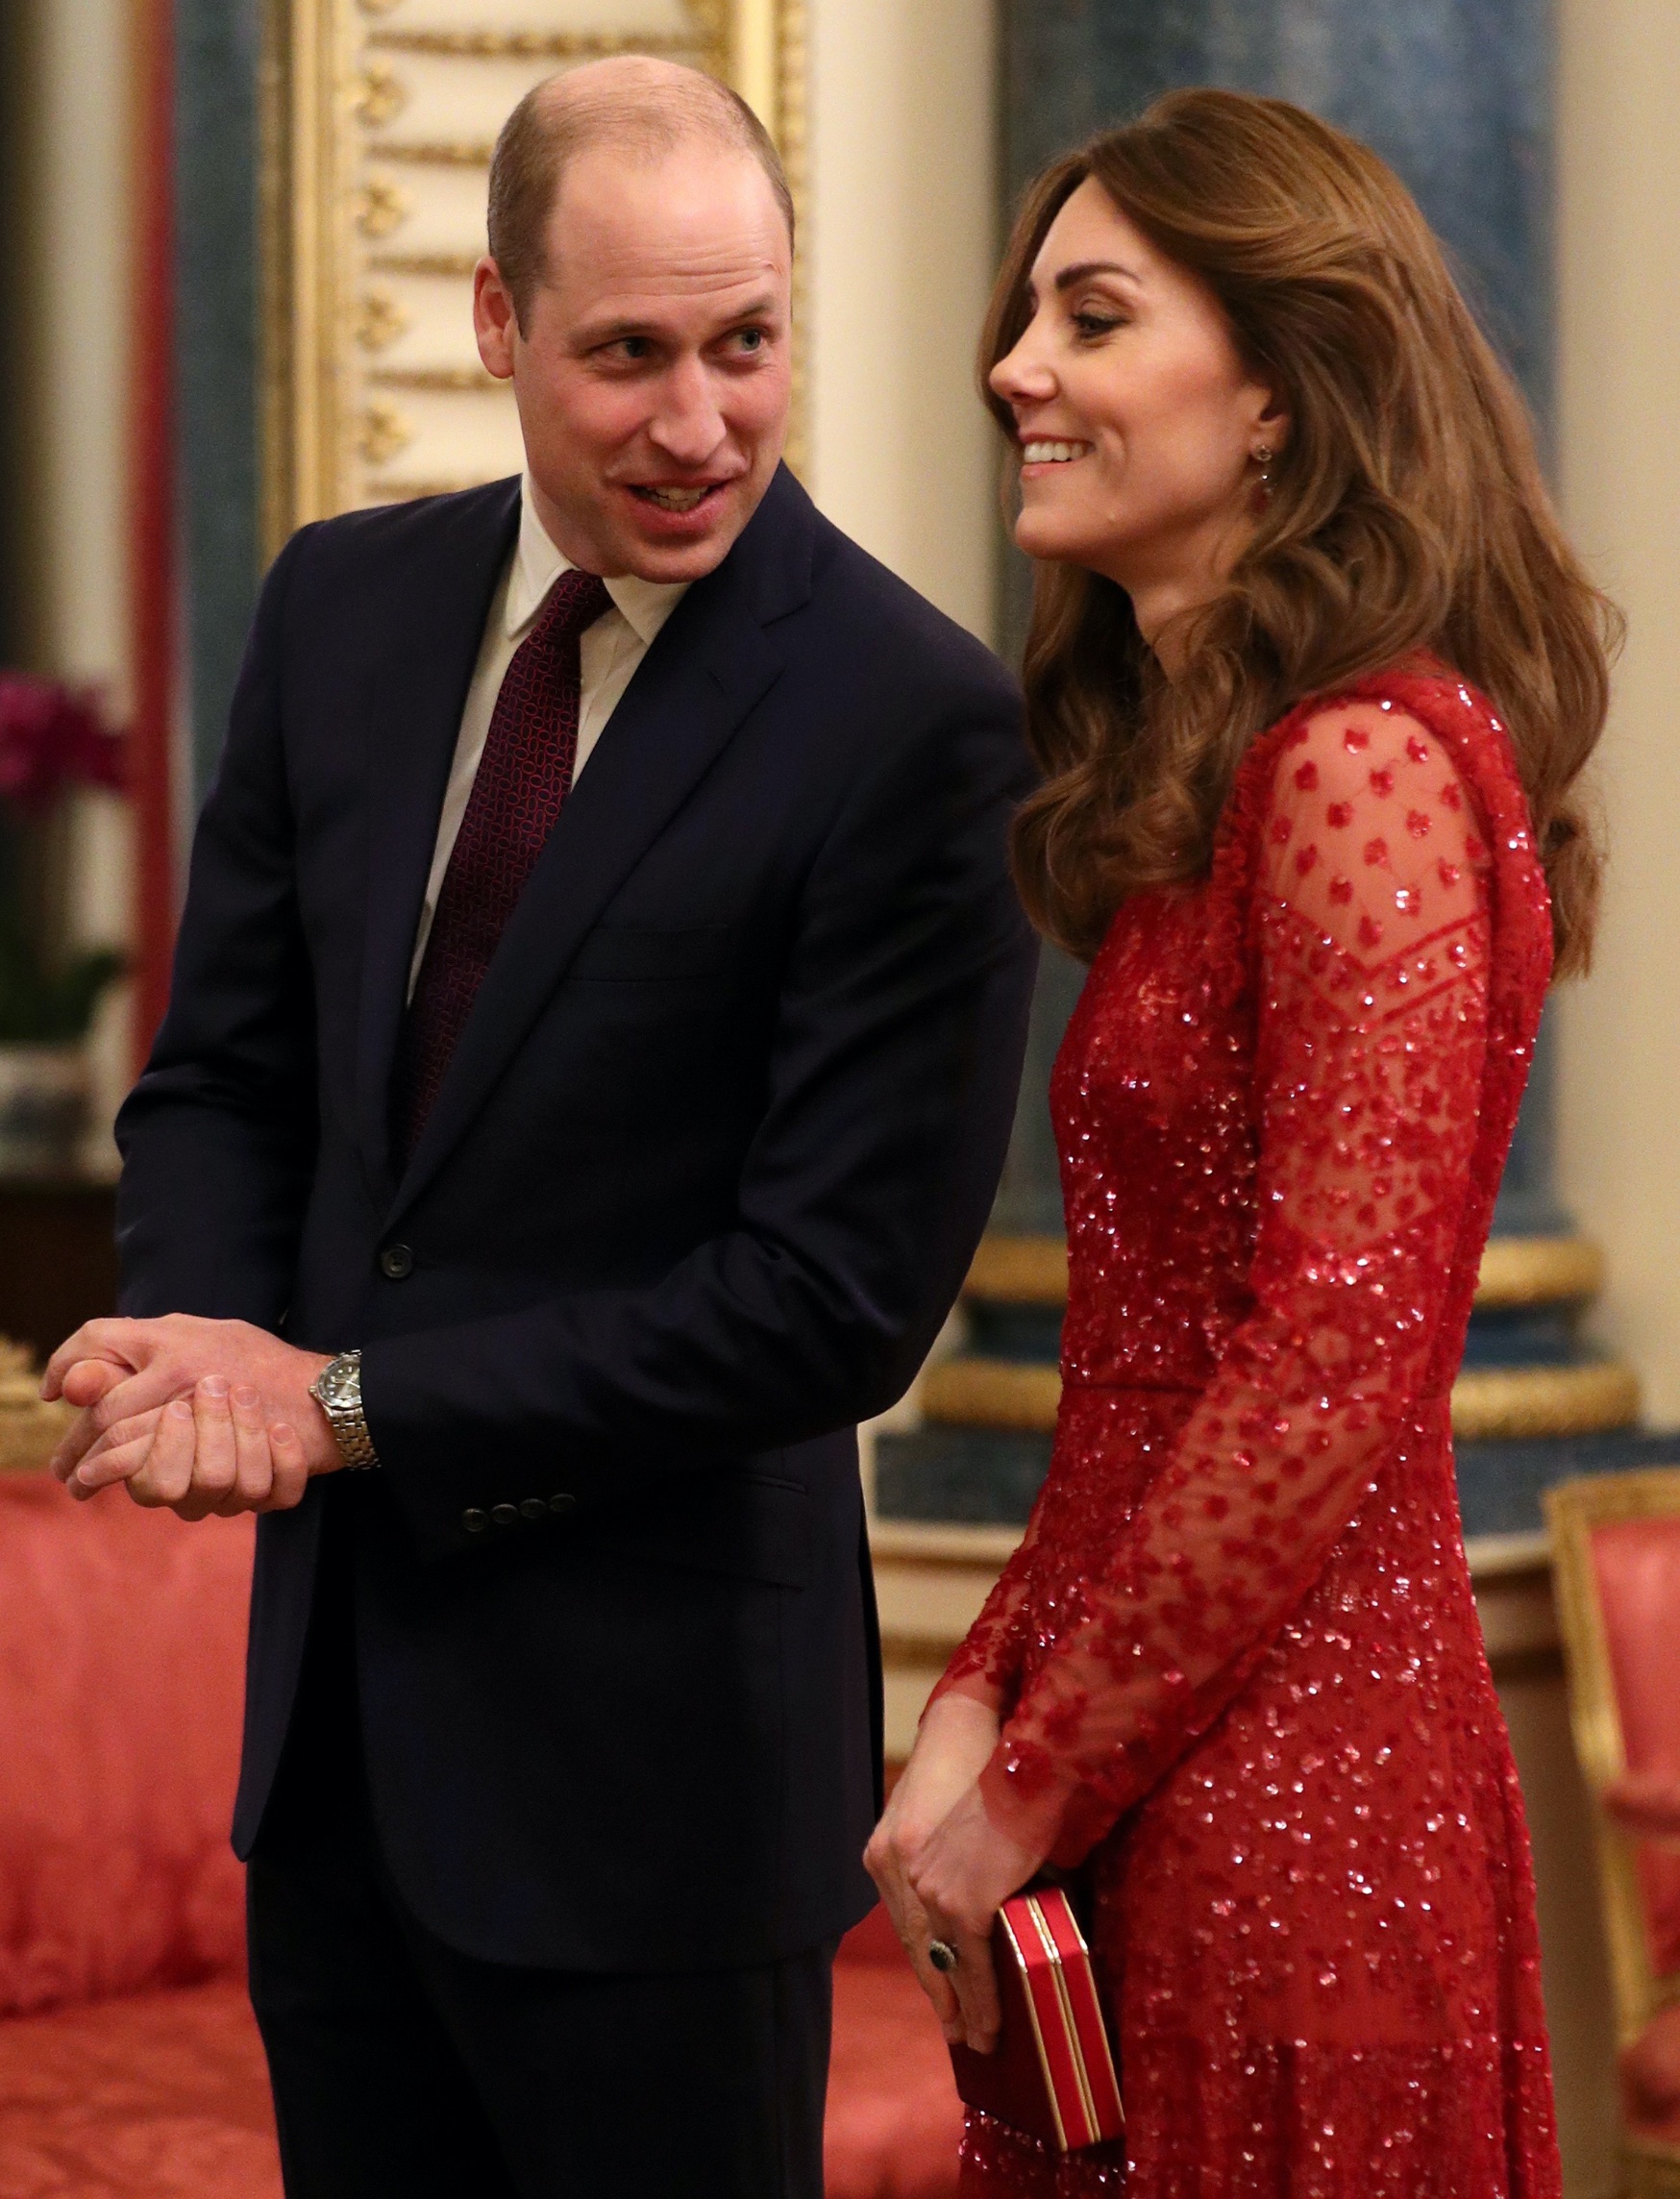 The Duke and Duchess of Cambridge attend a reception to mark the UK-Africa Investment Summit at Buckingham Palace, London, UK, on the 20th January 2020.

Picture by Yui Mok/WPA-Pool.
20 Jan 2020, Image: 493872073, License: Rights-managed, Restrictions: NO United Kingdom, Model Release: no, Credit line: MEGA / The Mega Agency / Profimedia